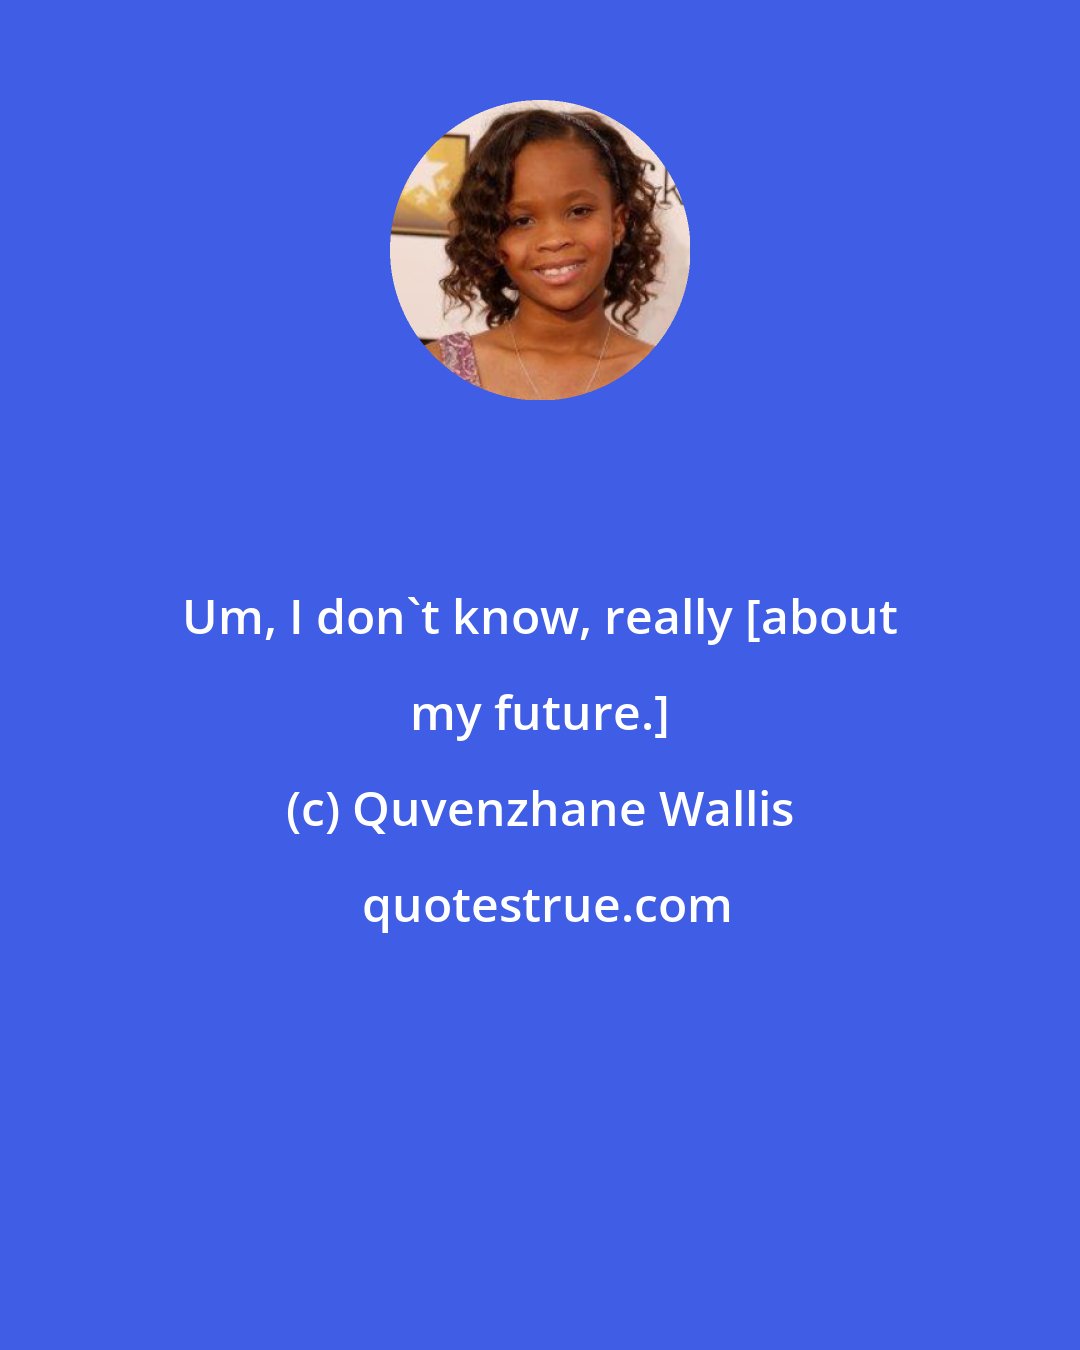 Quvenzhane Wallis: Um, I don't know, really [about my future.]